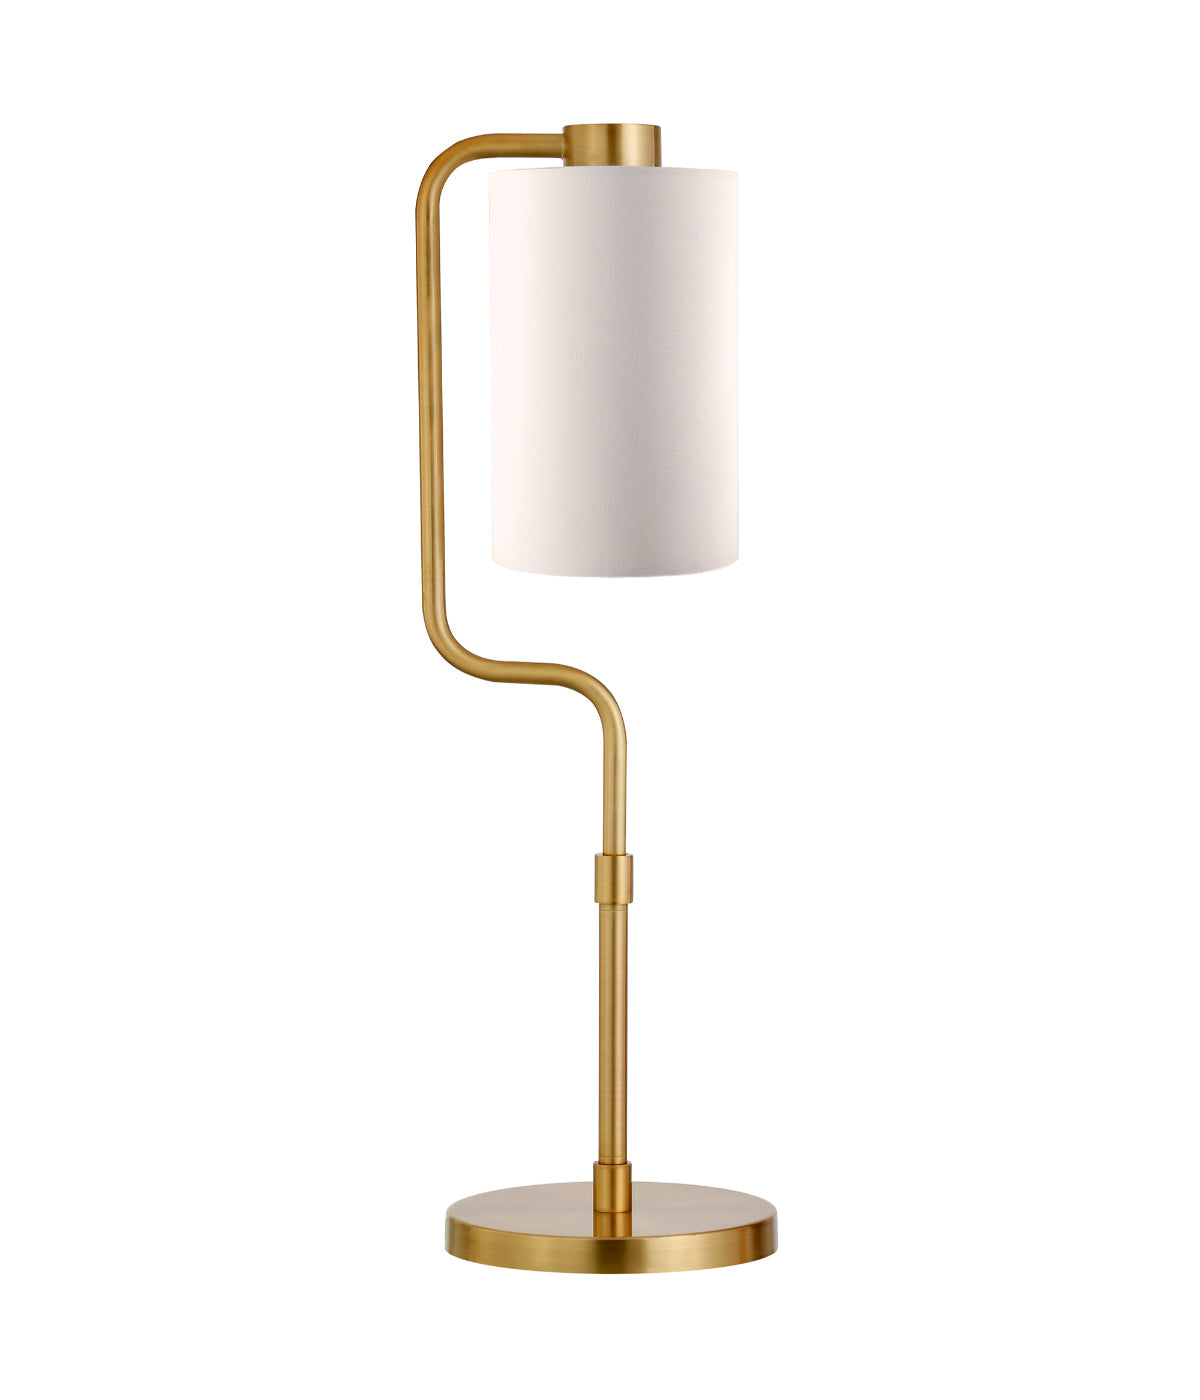 Daniel Tall Table Lamp with Fabric Shade Brass & White